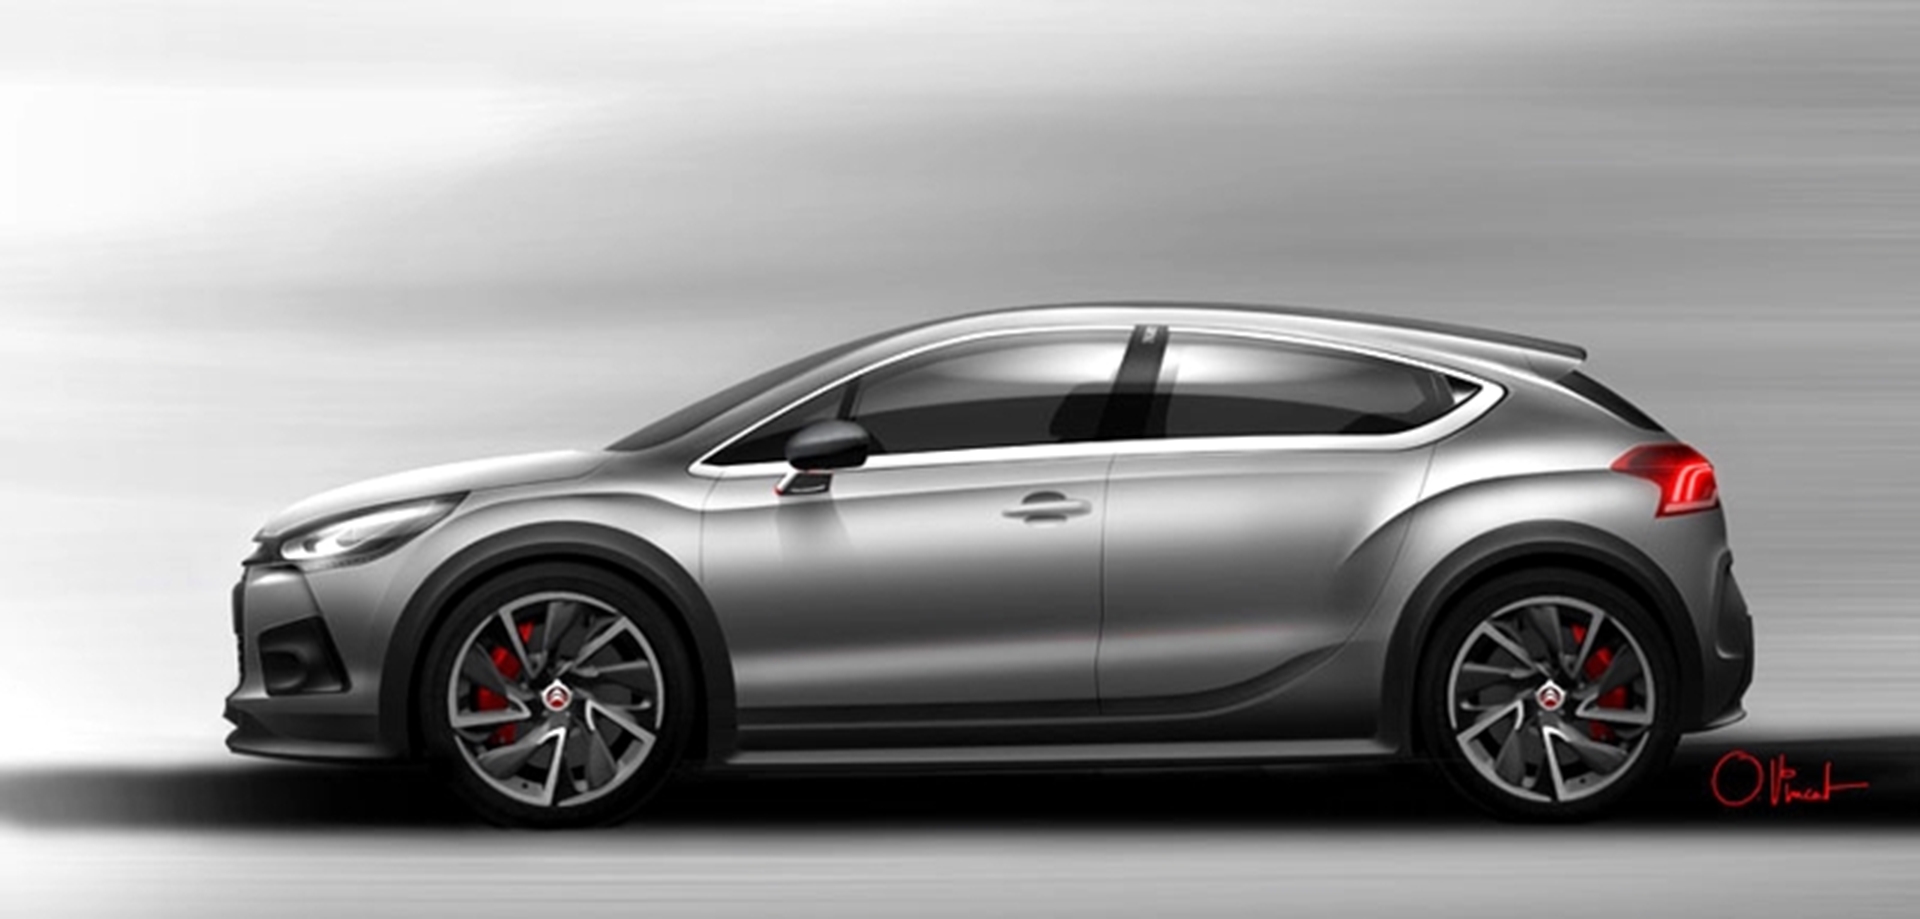 DS4 RACING CONCEPT a hot-blooded concept car